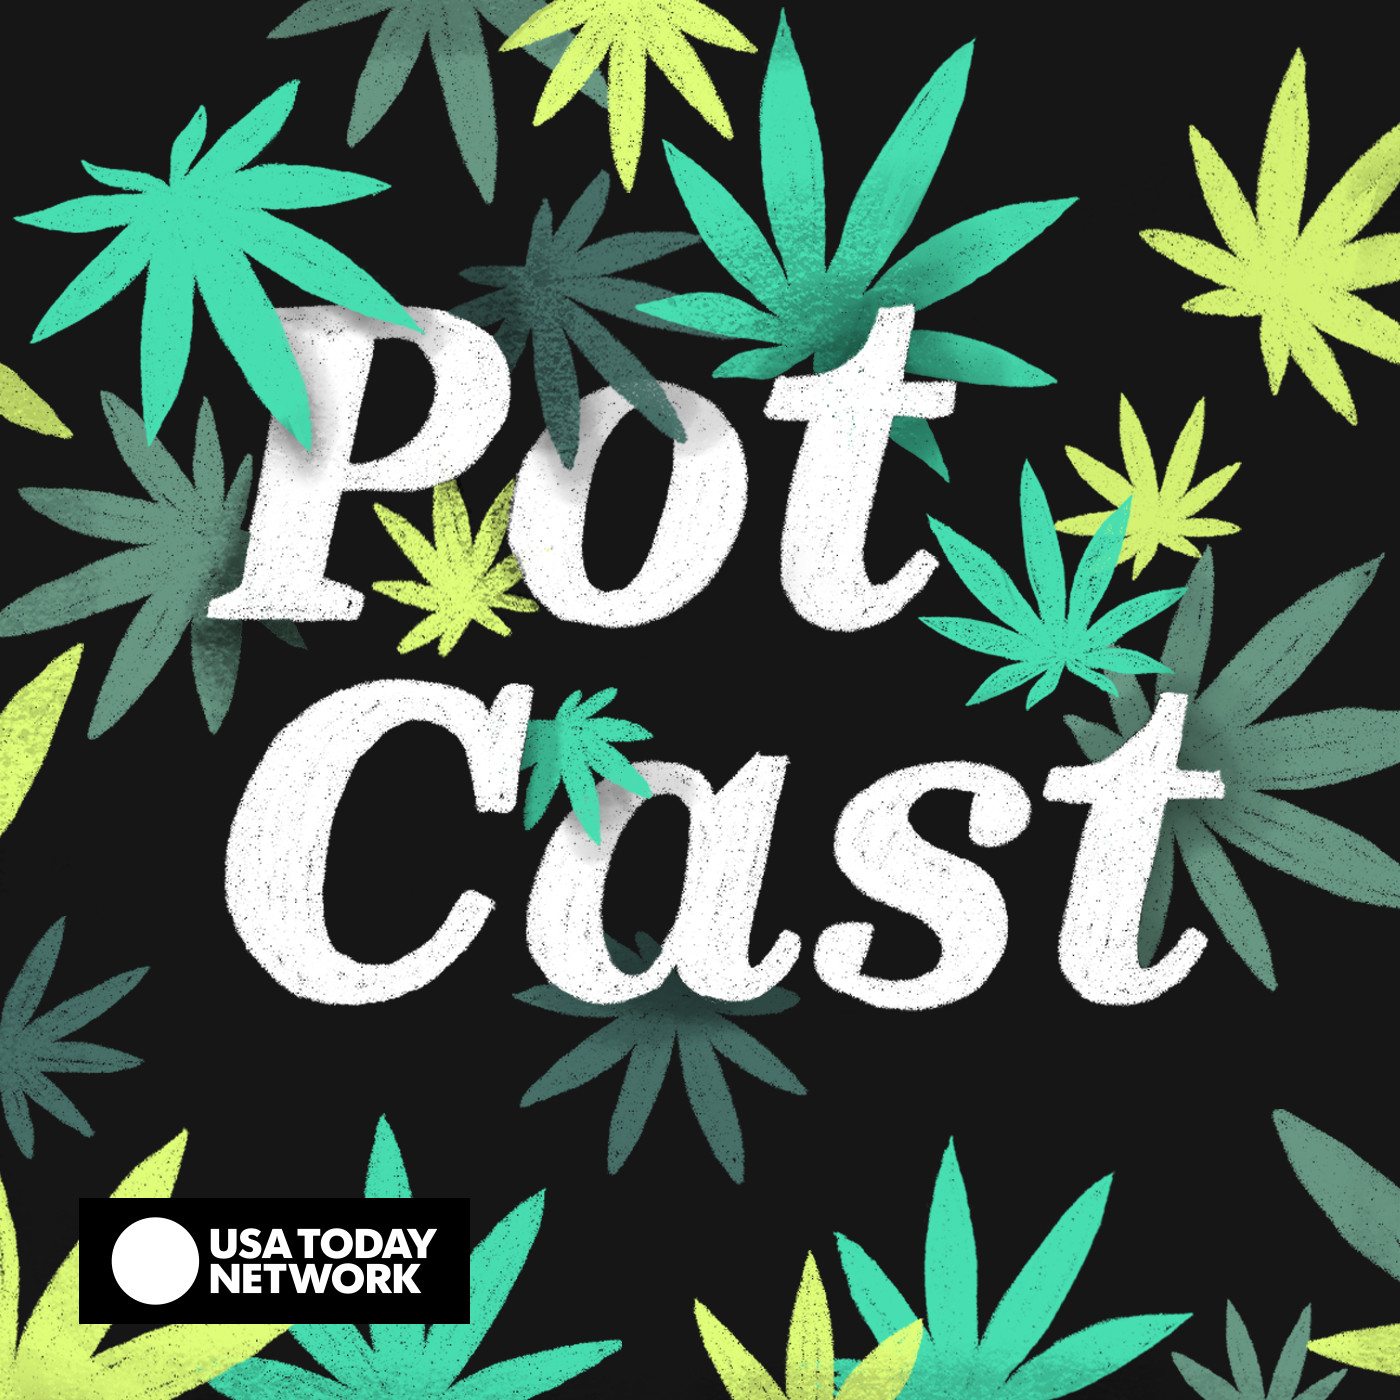 Introducing 'The Potcast,' a new USA TODAY NETWORK podcast